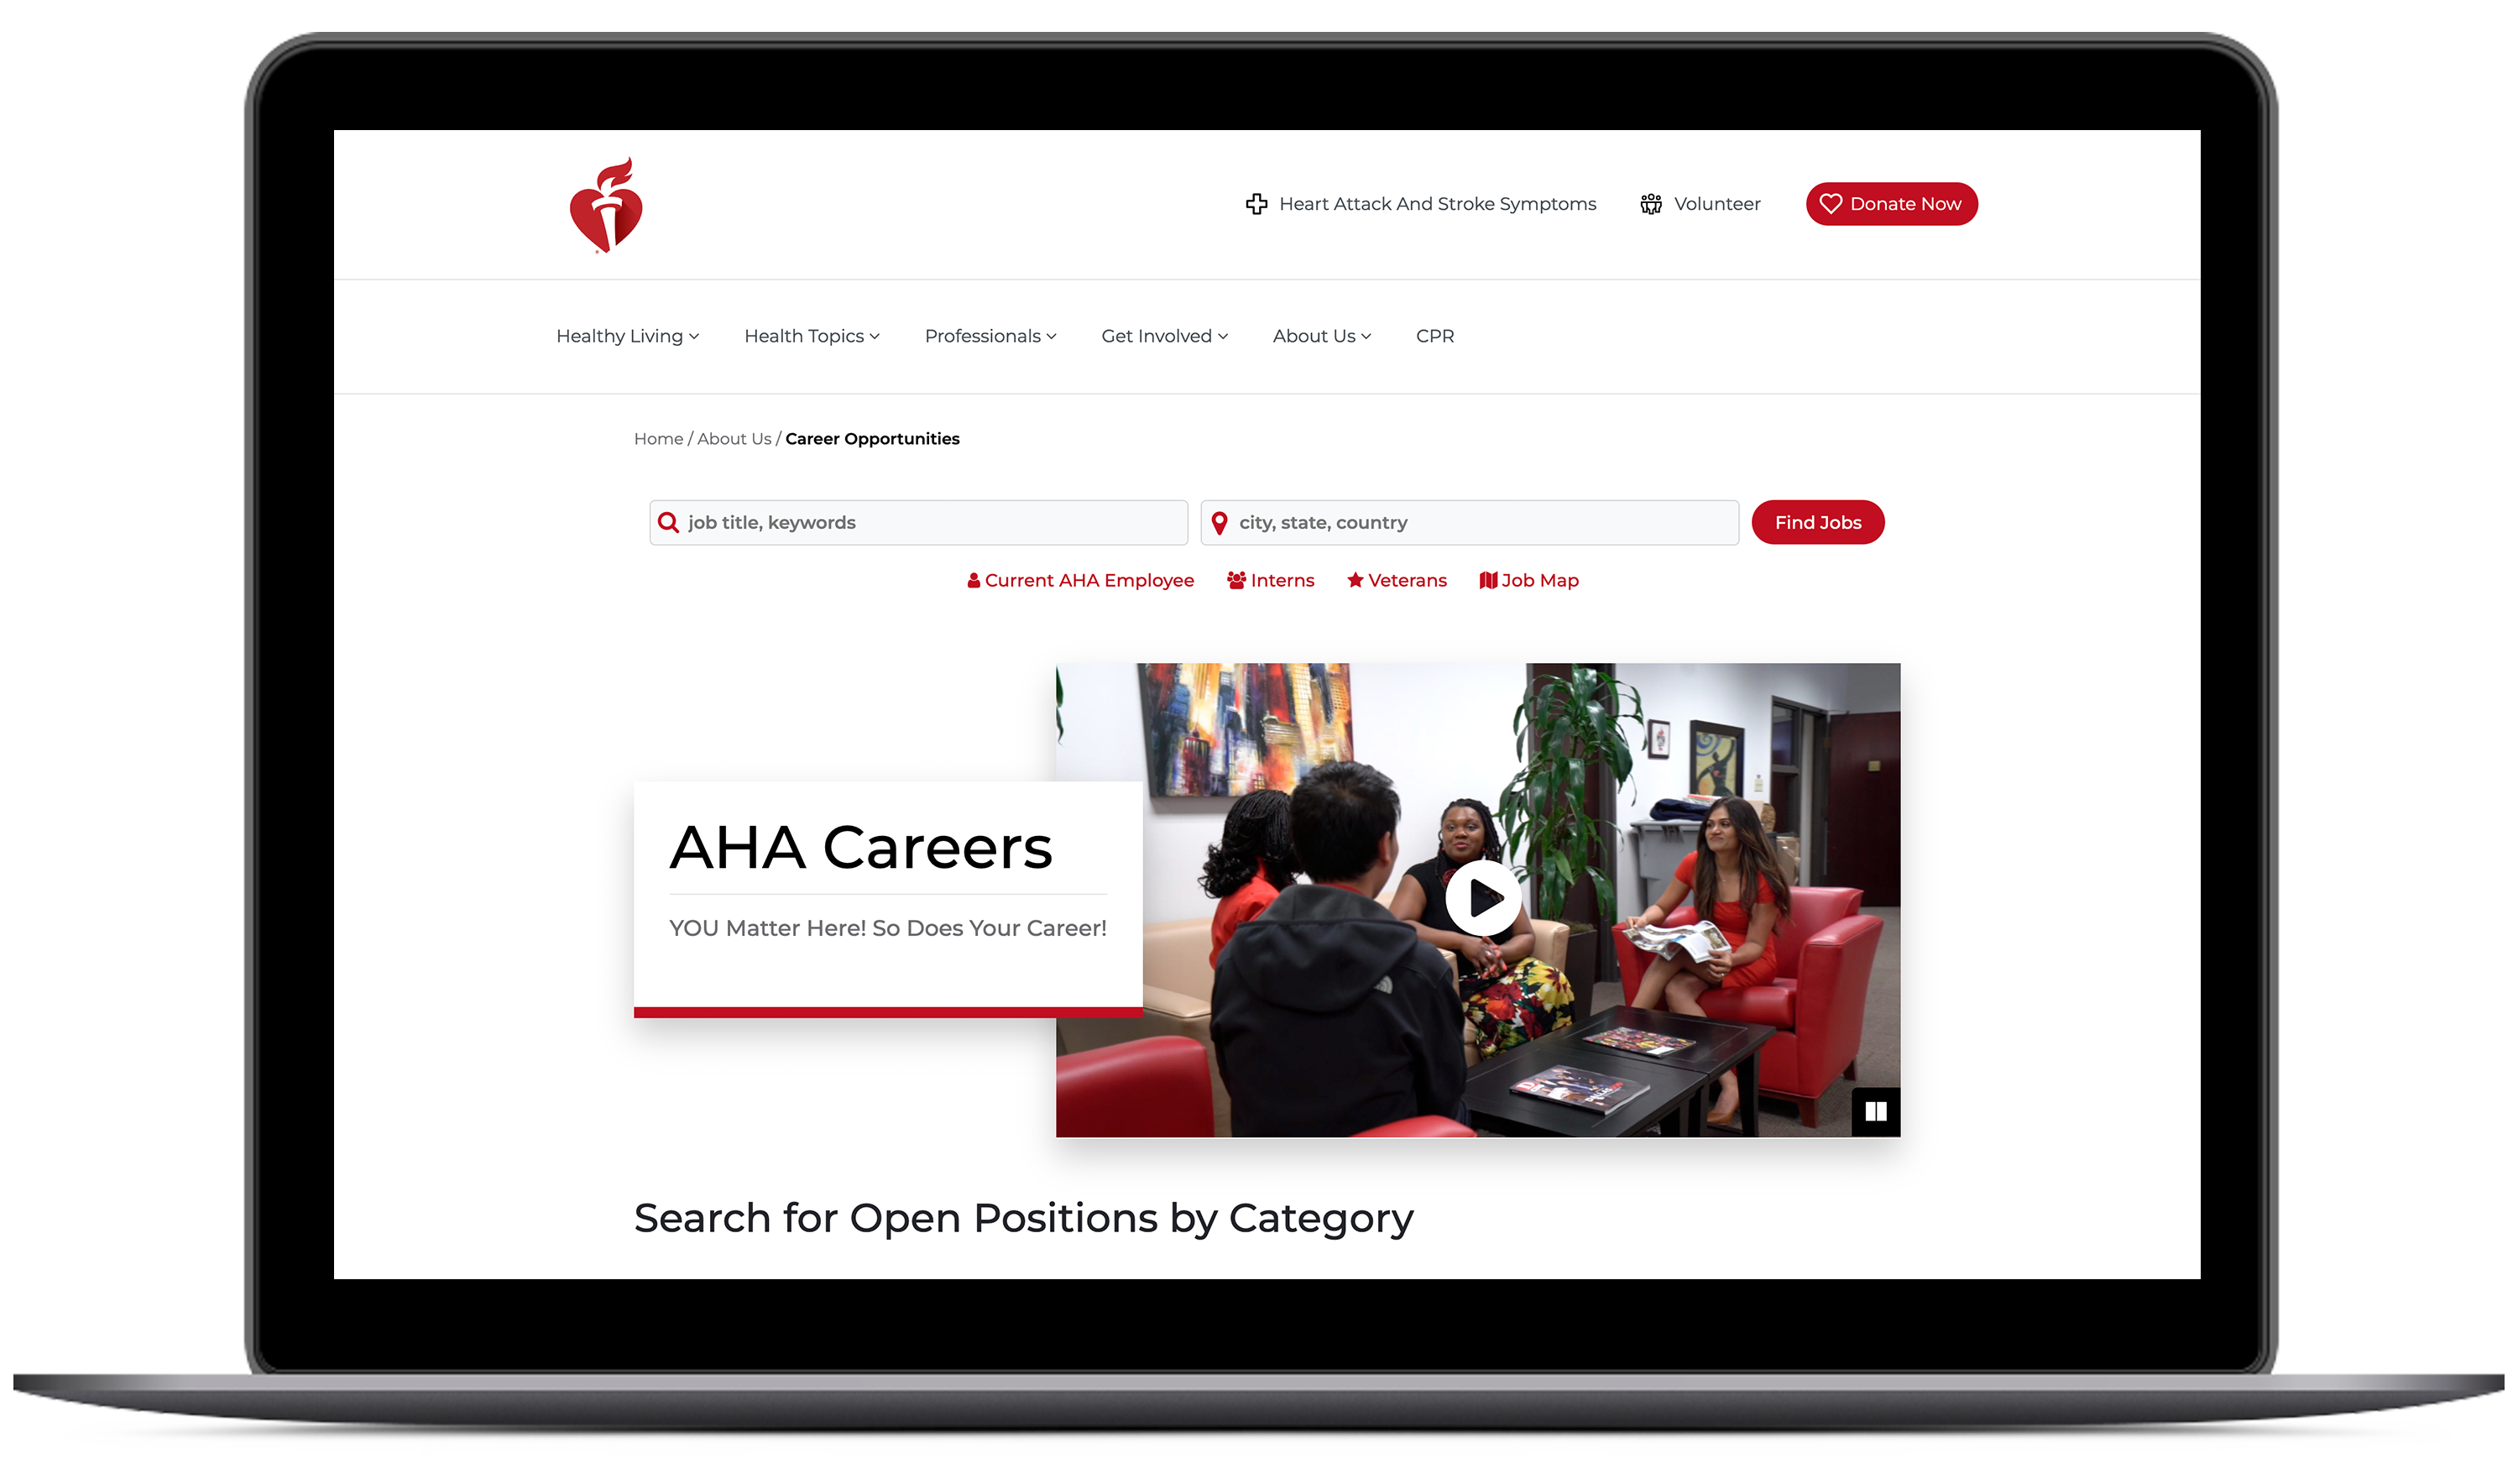 American Heart Association careers website by Recruit Rooster